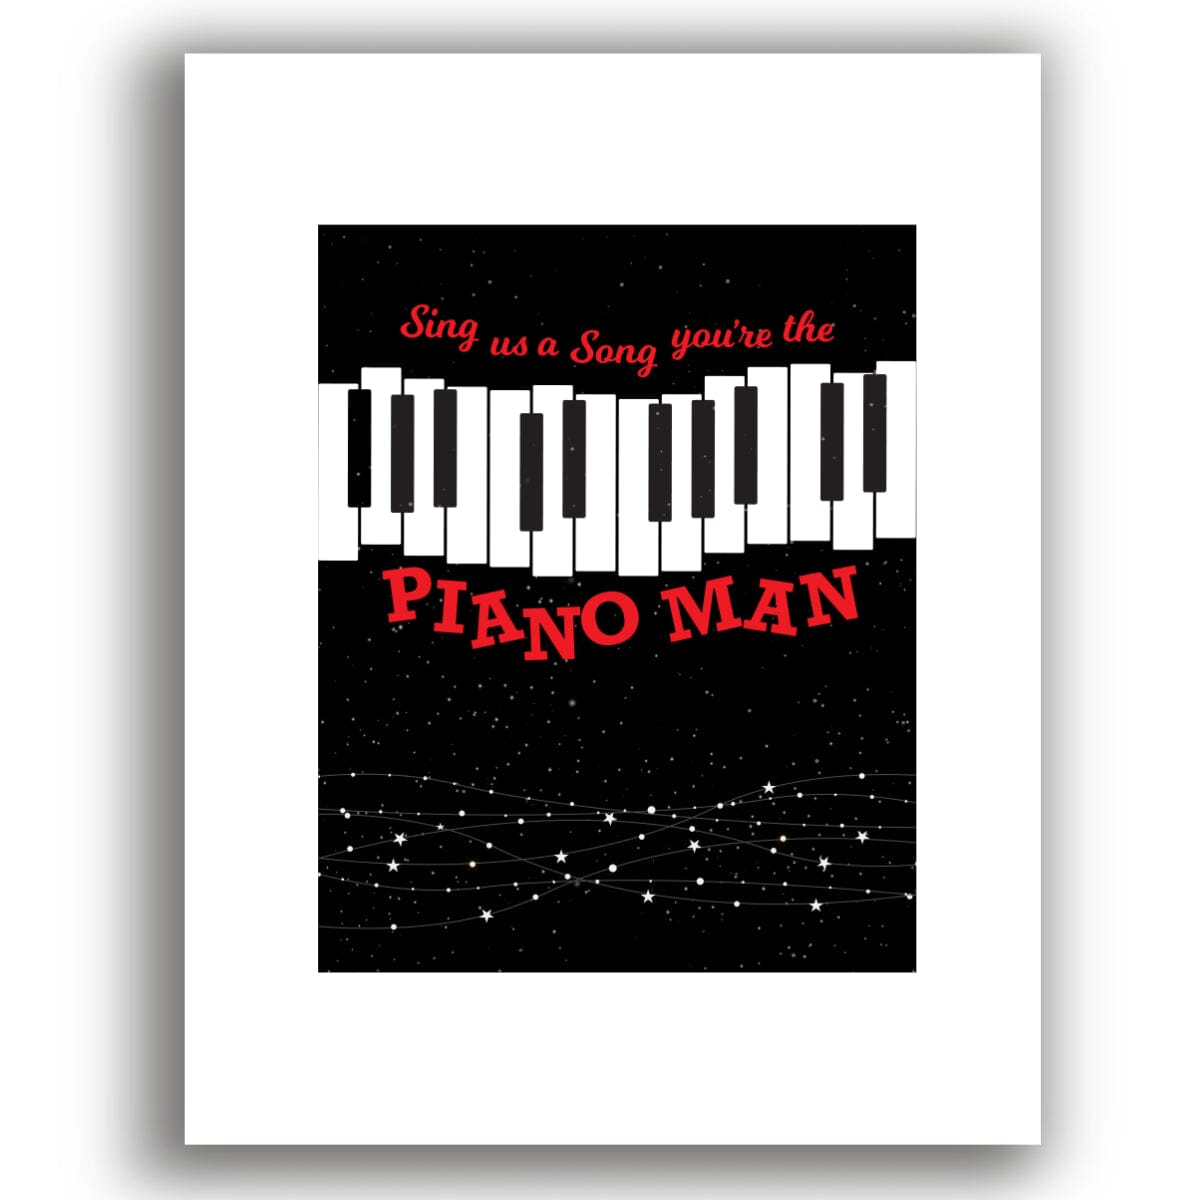 Piano Man by Billy Joel - Classic Rock Art Song Lyrics Print Song Lyrics Art Song Lyrics Art 8x10 White Matted Print 